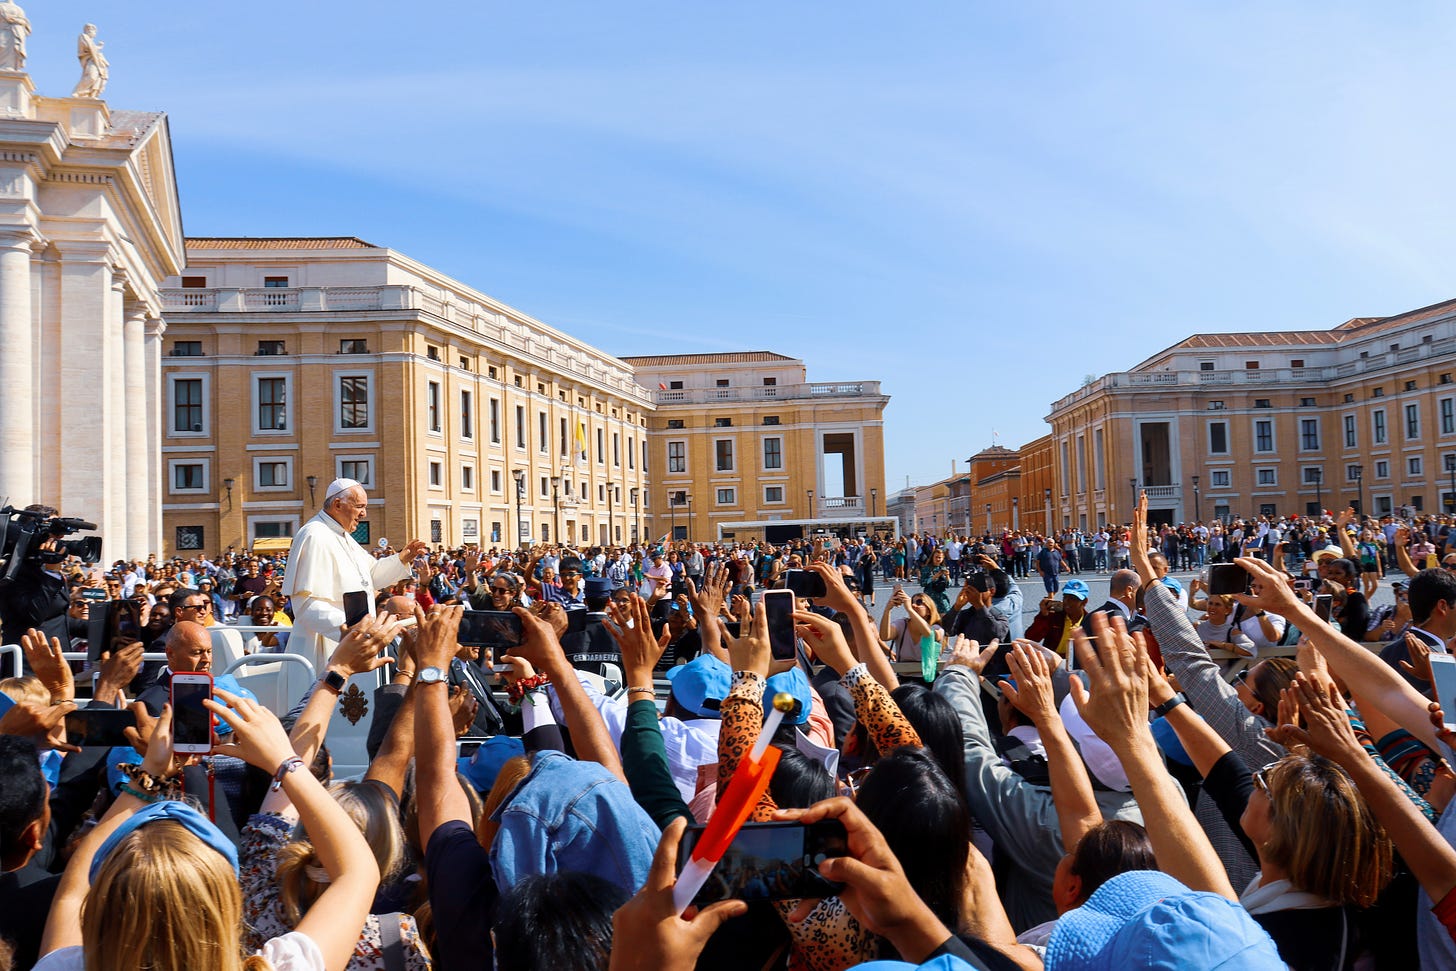 Pope Francis in Vatican City